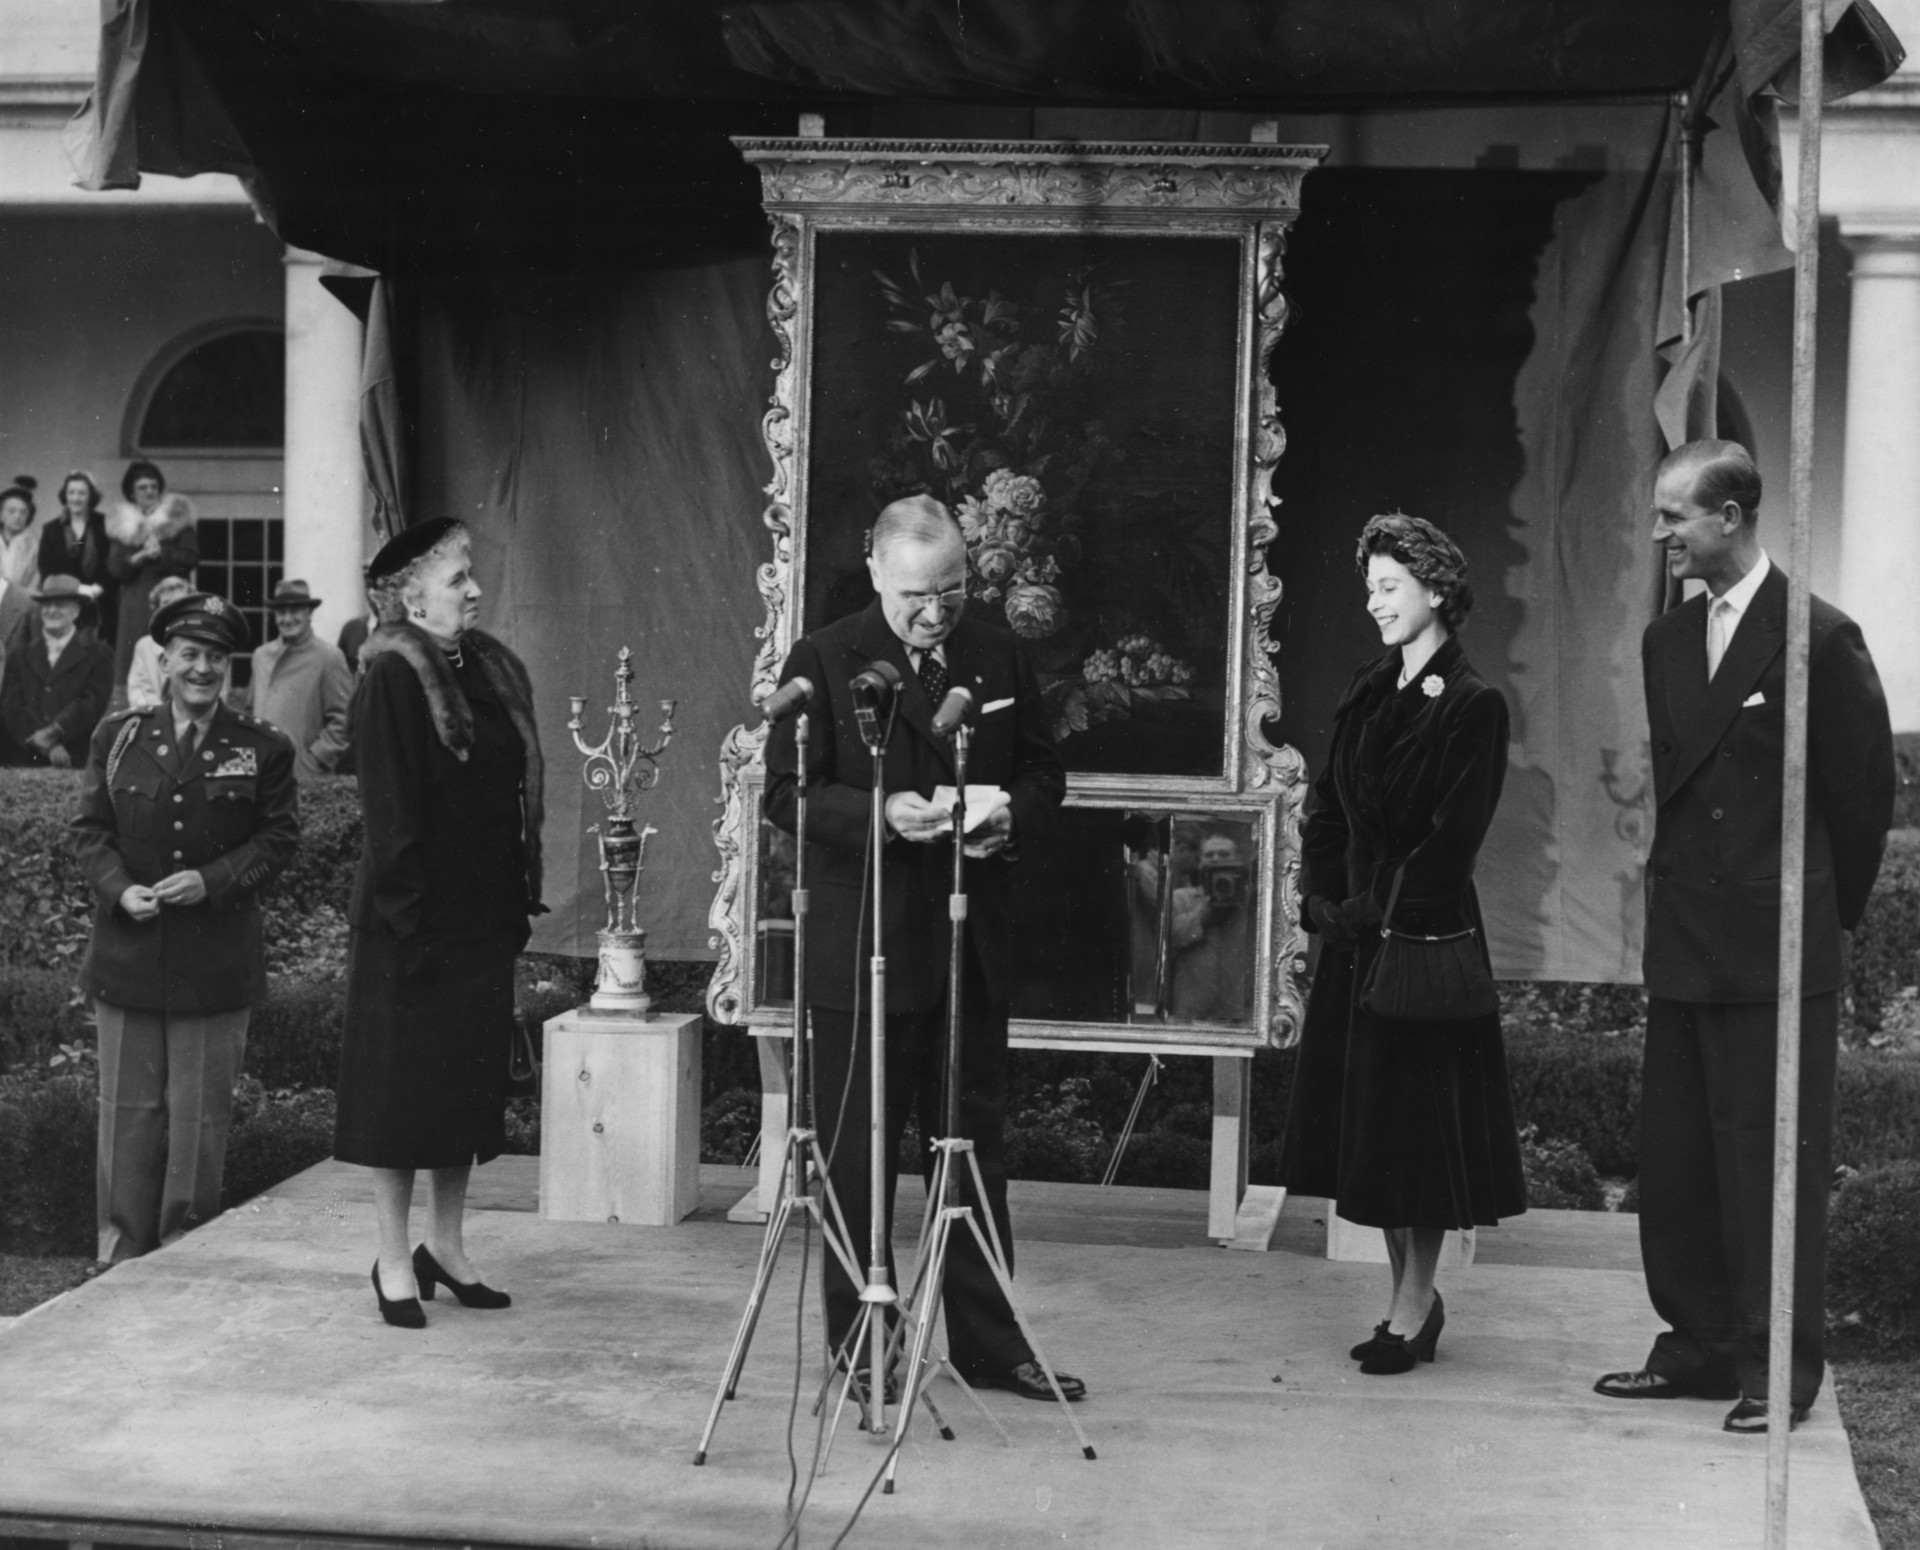 Princess Elizabeth and Prince Philip smile as US President Harry S. Truman pauses during a speech in 1951.<p><a href="https://www.msn.com/en-au/community/channel/vid-7xx8mnucu55yw63we9va2gwr7uihbxwc68fxqp25x6tg4ftibpra?cvid=94631541bc0f4f89bfd59158d696ad7e">Follow us and access great exclusive content every day</a></p>